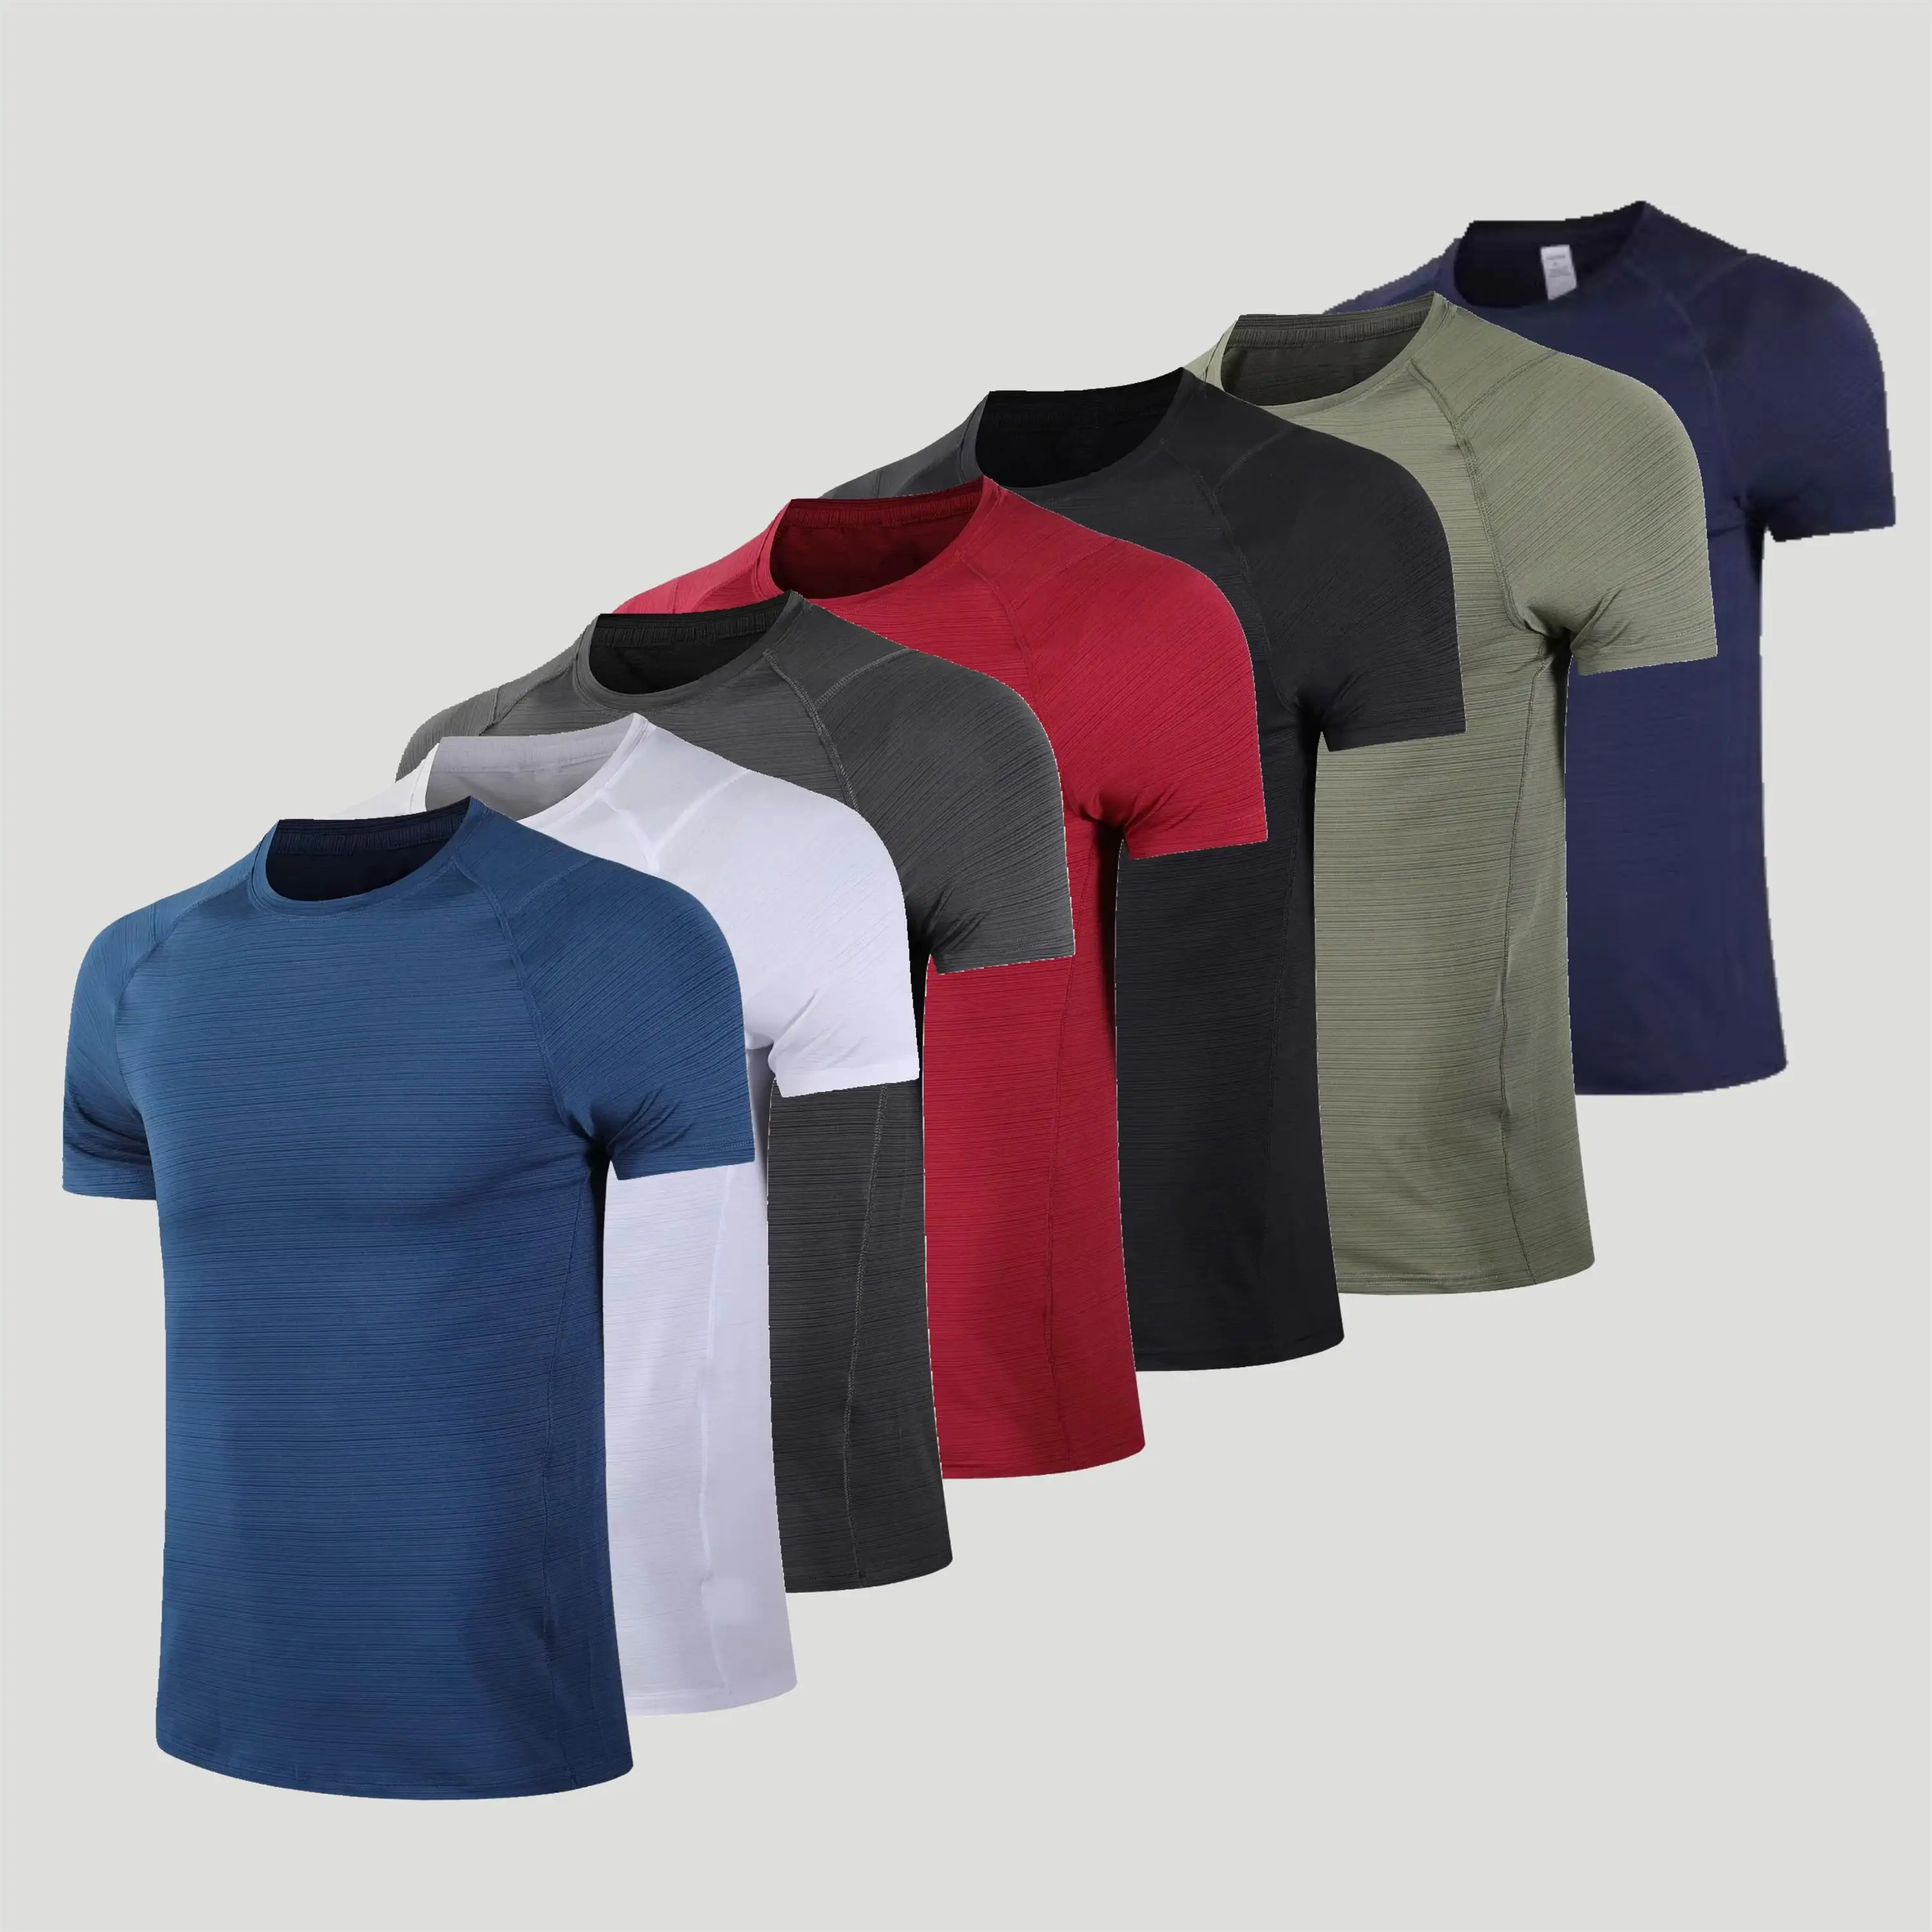 

90% Polyester 10% Elastane Men's Quick Dry Moisture Wicking Active Athletic Performance Crew t-shirt